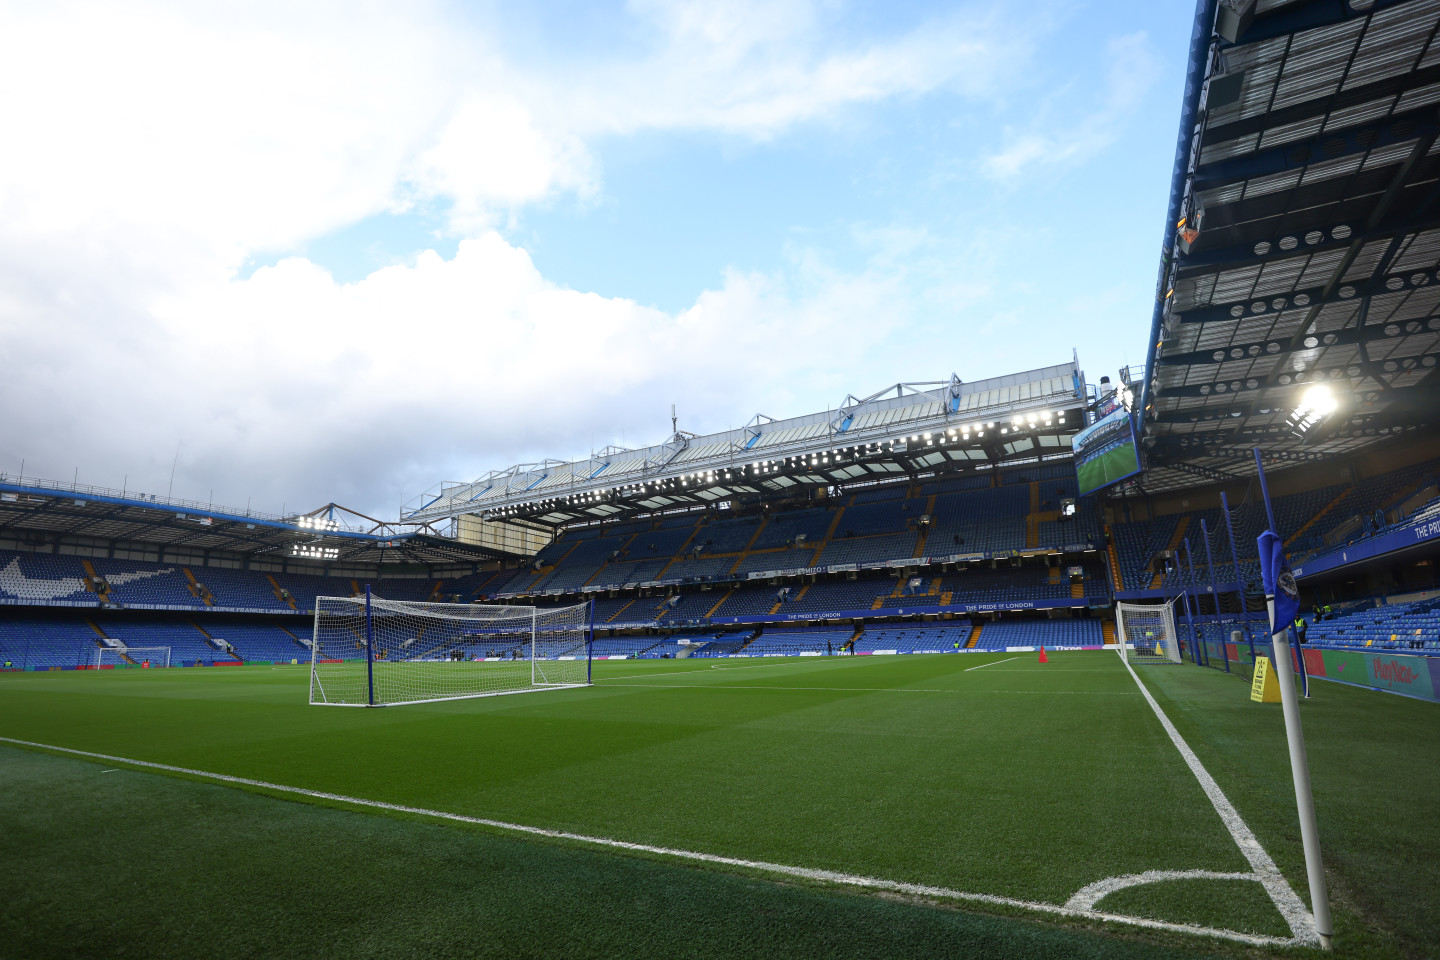 Angry neighbours set to fight Chelsea FC over plans to turn Stamford Bridge  into huge new London gig venue - MyLondon